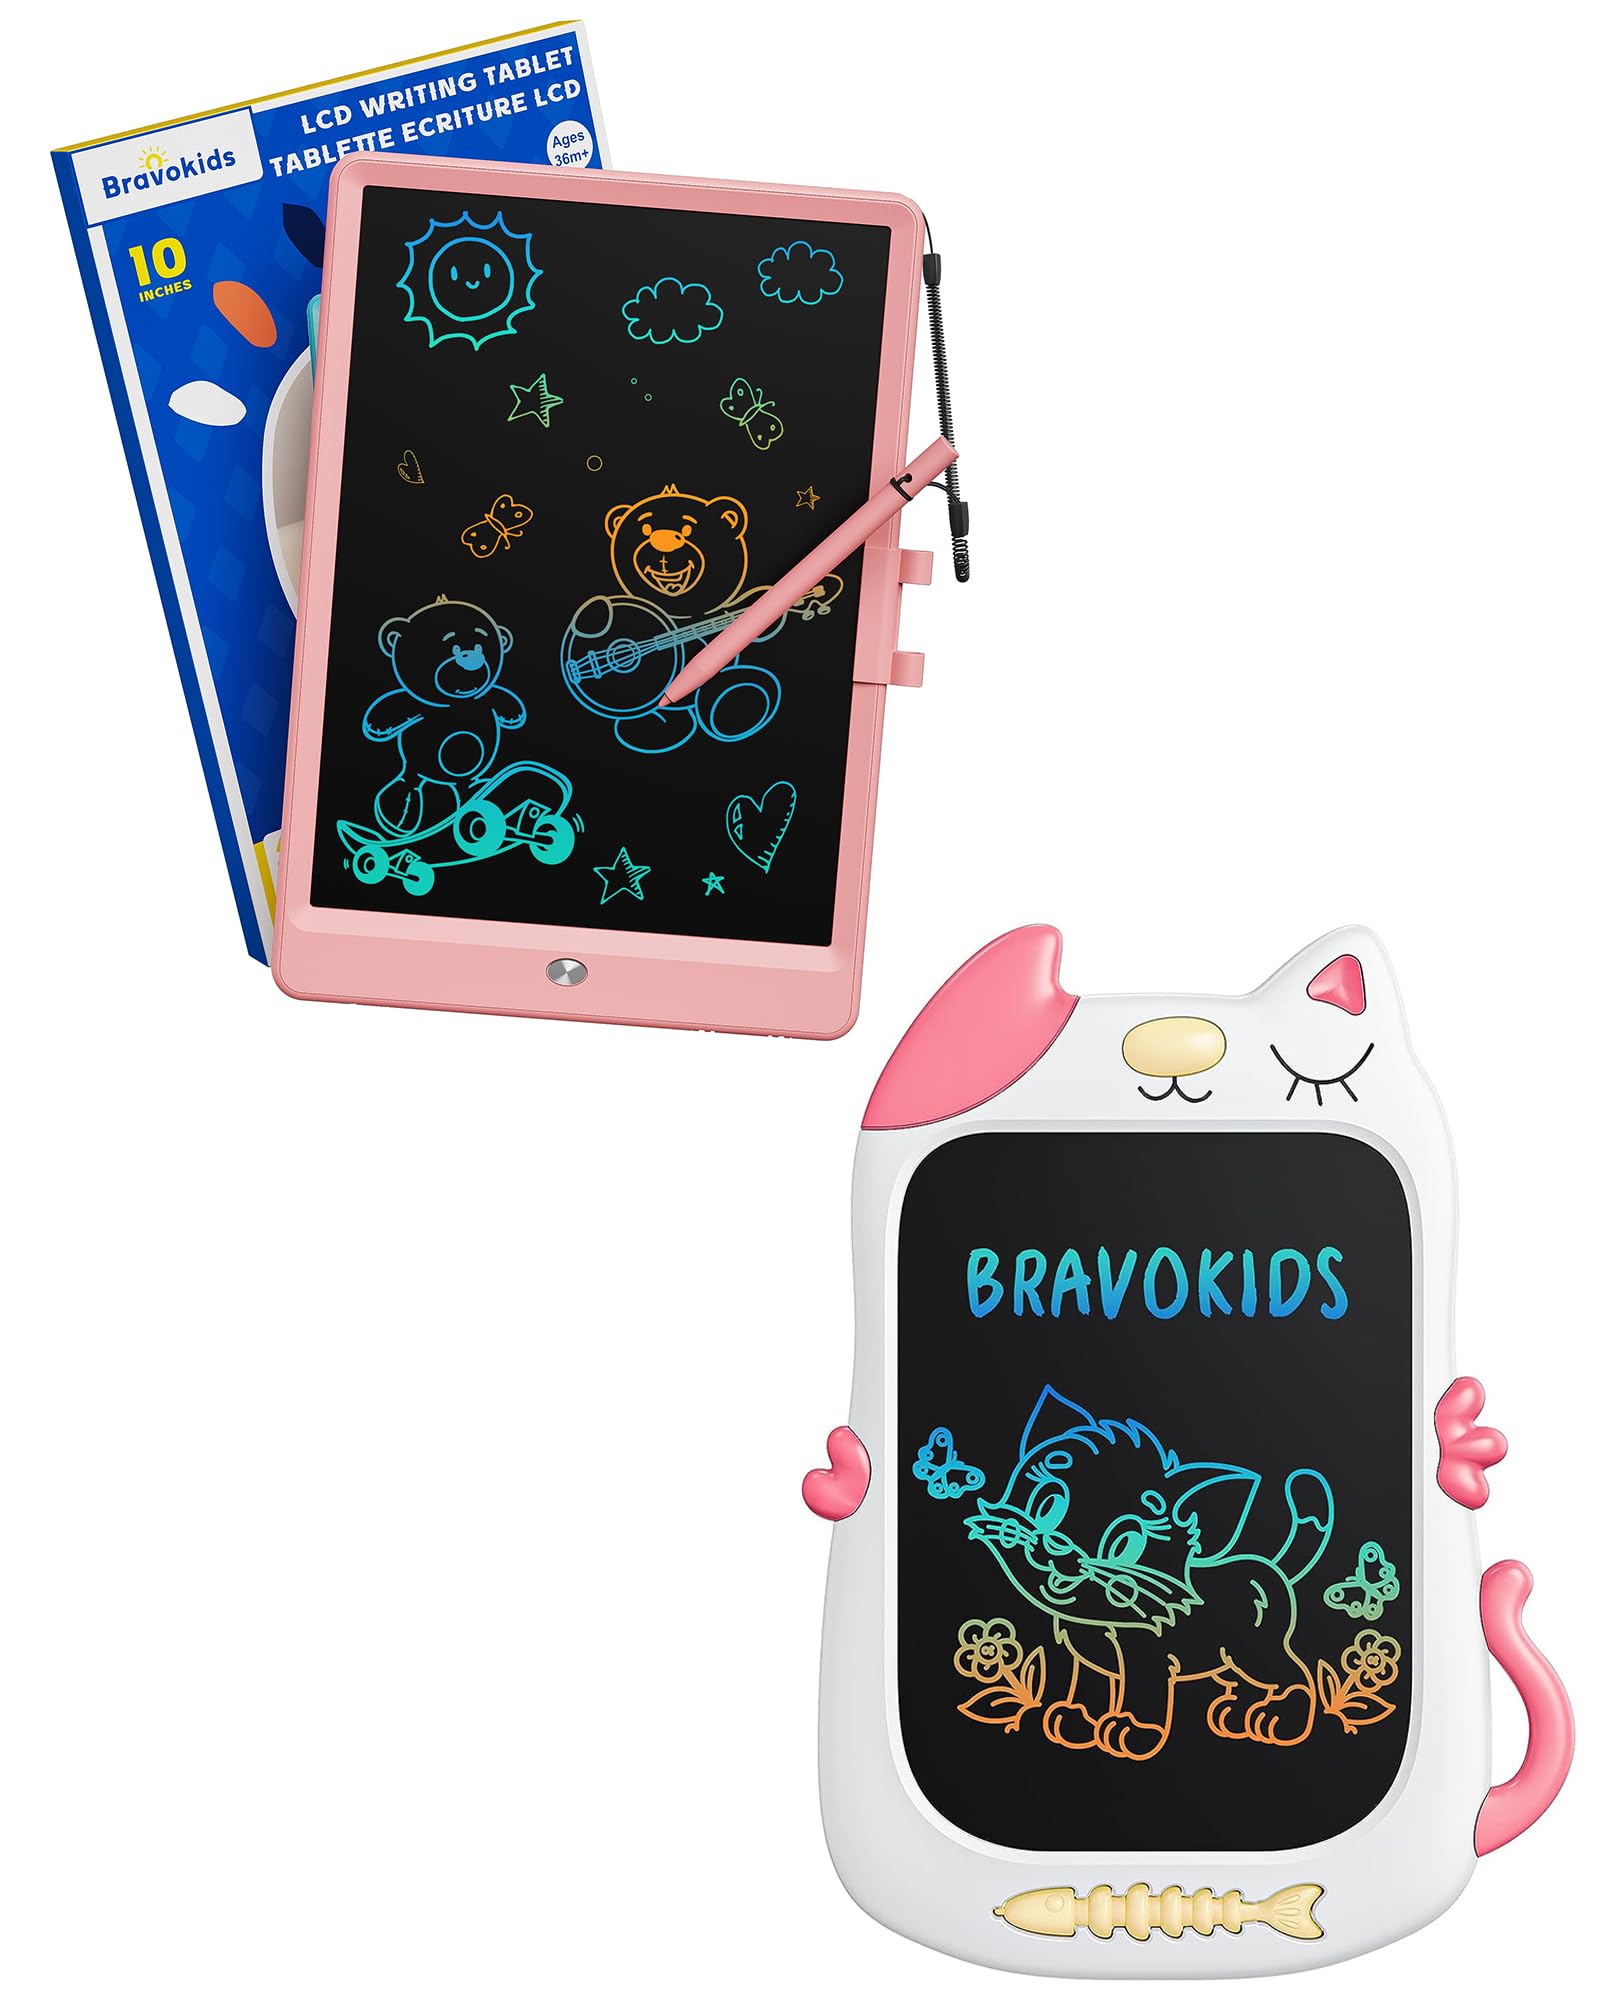 Bravokids Toys for 3-6 Years Old Girls, LCD Writing Tablet Doodle Board, Electronic Drawing Tablet Drawing Pads, Educational Birthday Gift for 3 4 5 6 7 8 Years Old Kids (10 inch Pink, 8.5 Cat)